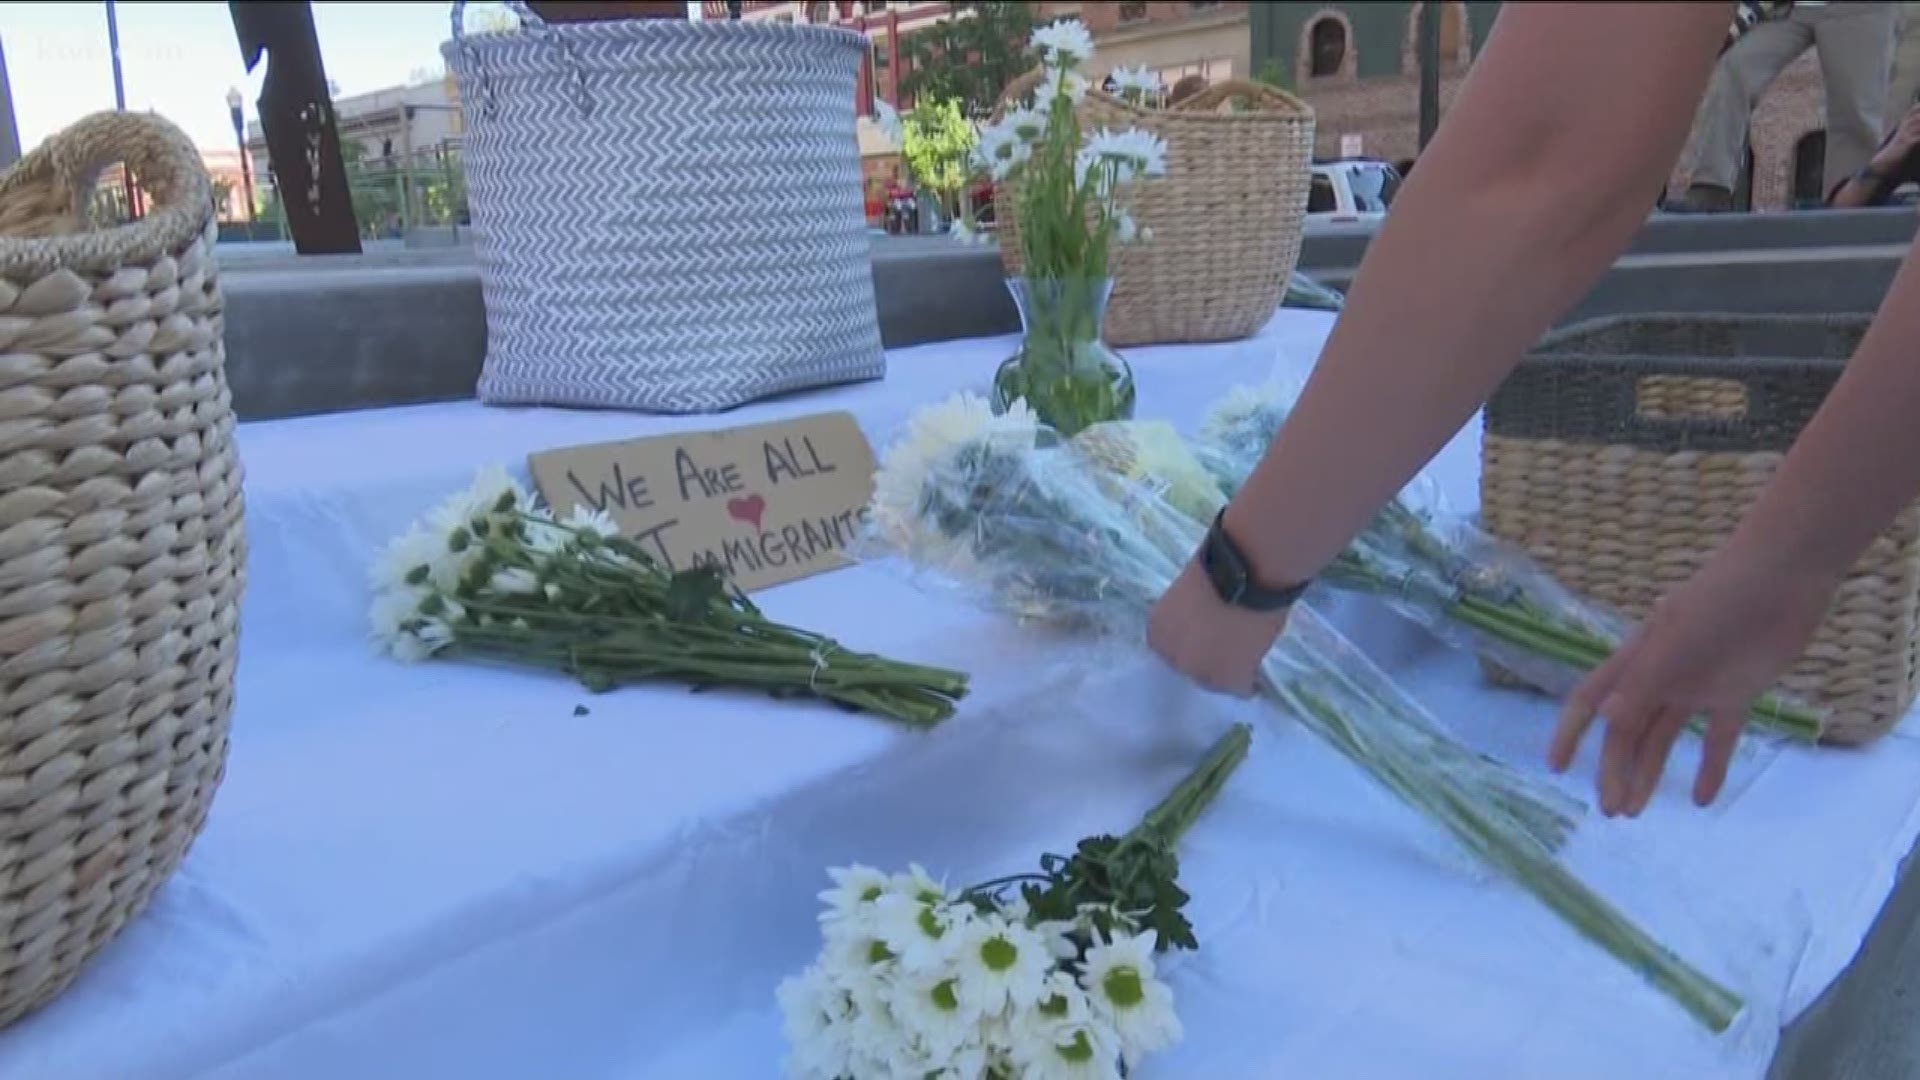 There was a huge turnout Monday as people made their way to Boise City Hall's front steps to show their support for the victims of a mass stabbing in Boise.